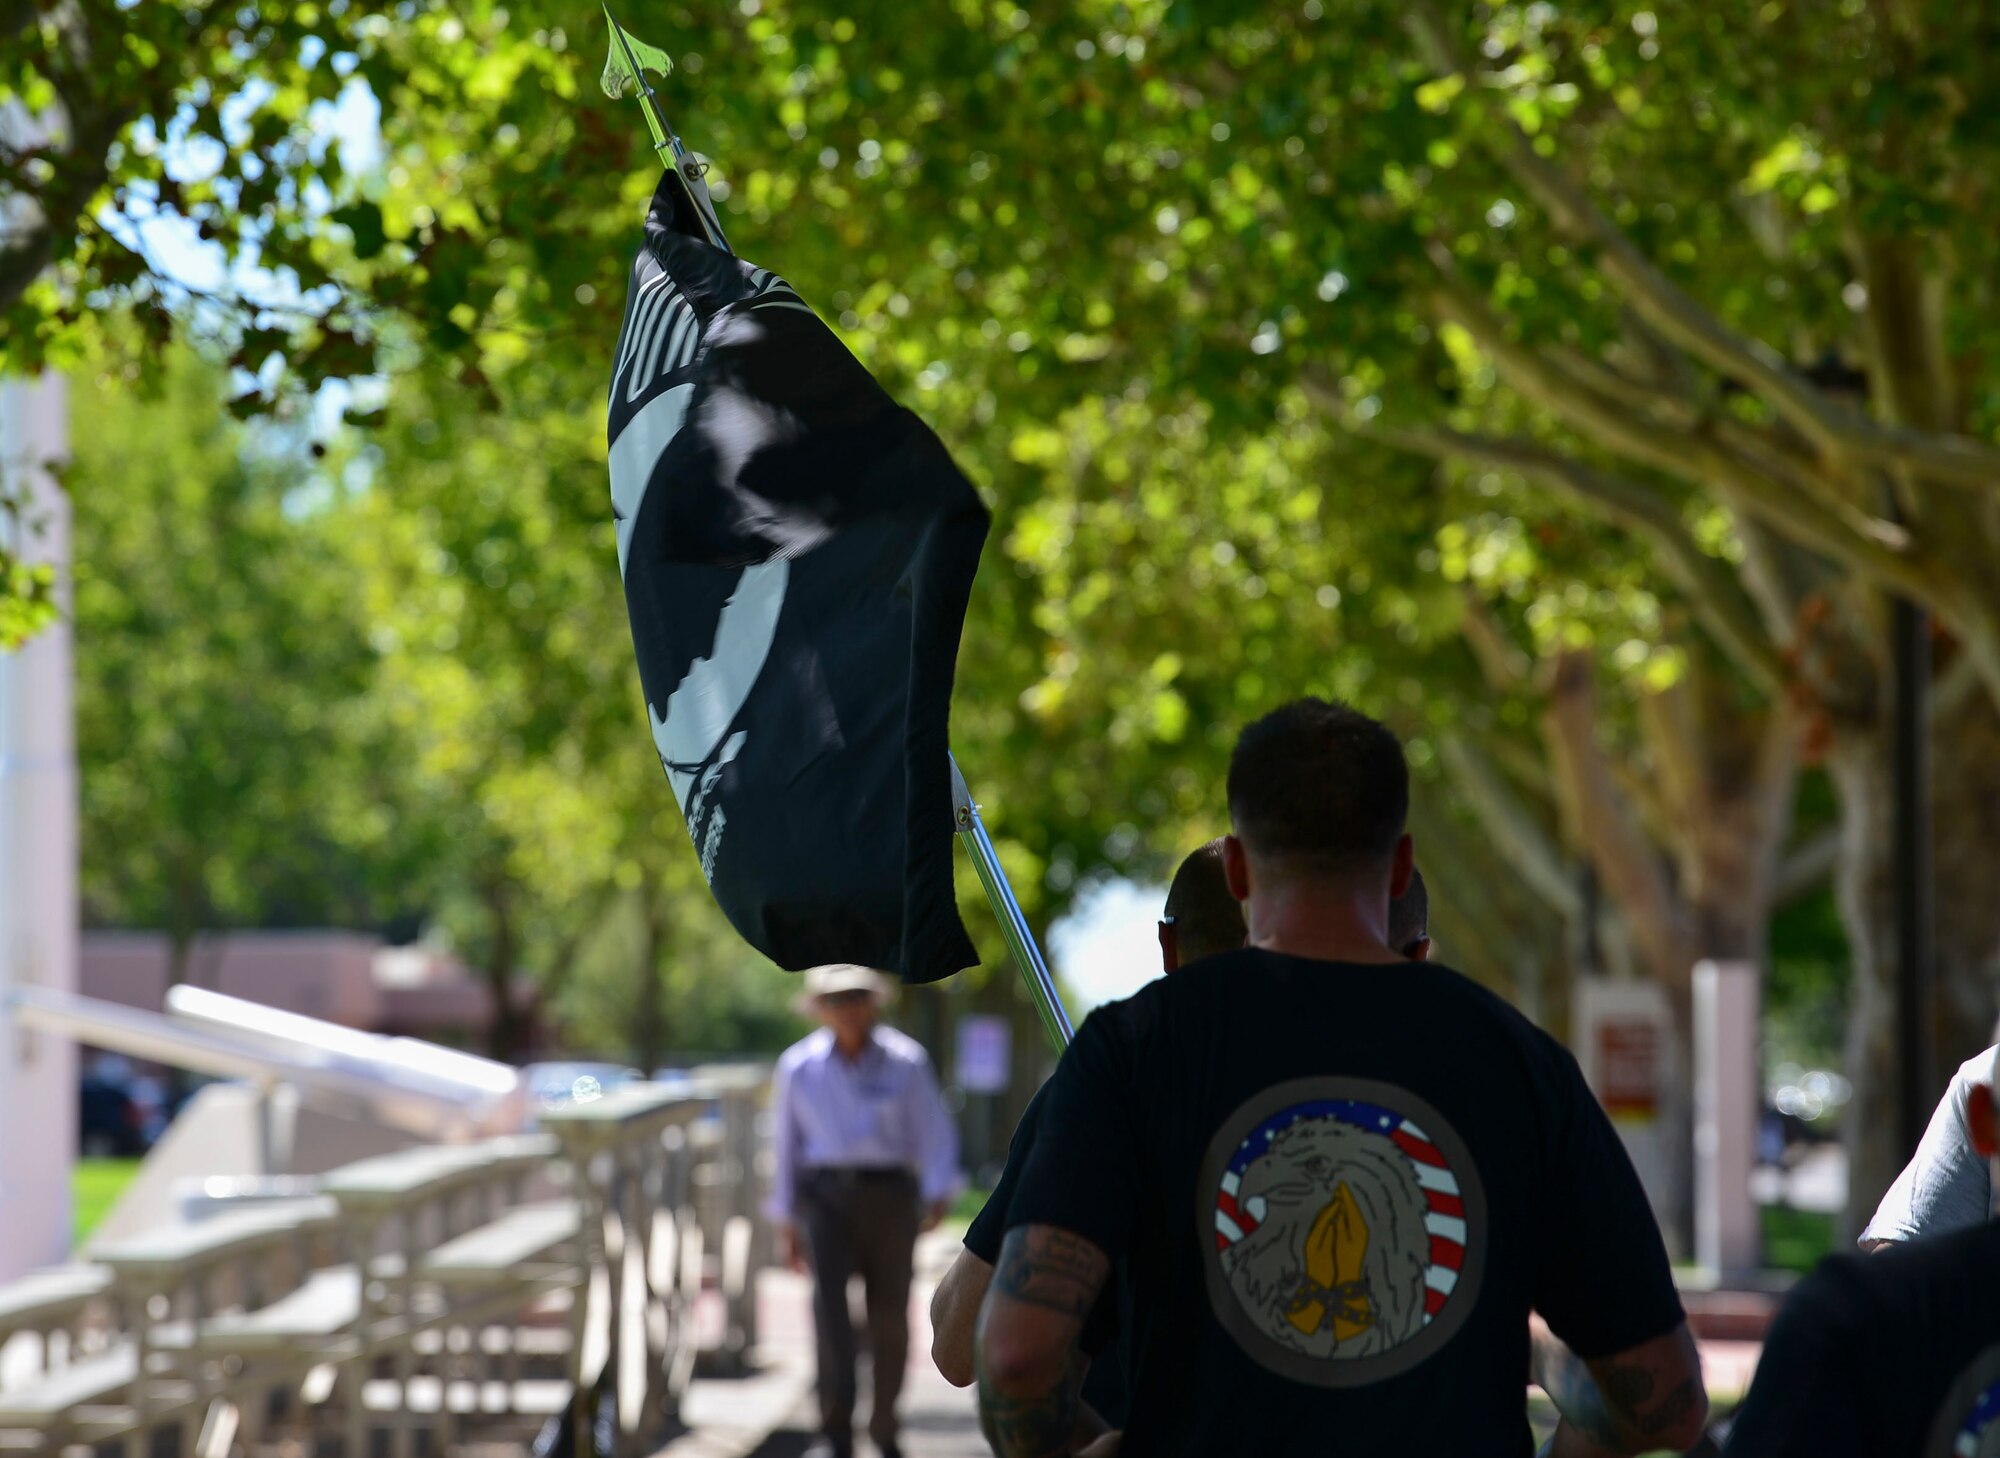 A Team Kirtland First Sergeant holds the POW/MIA flag during the 24-hour run or walk event at Kirtland Air Force Base, N.M., Sept. 19, 2019. After the 24 hours, a ceremony was hosted at the New Mexico Veterans Memorial Park where members of the community joined Team Kirtland to honor POW/MIAs. (U.S. Air Force photo by Senior Airman Enrique Barceló)